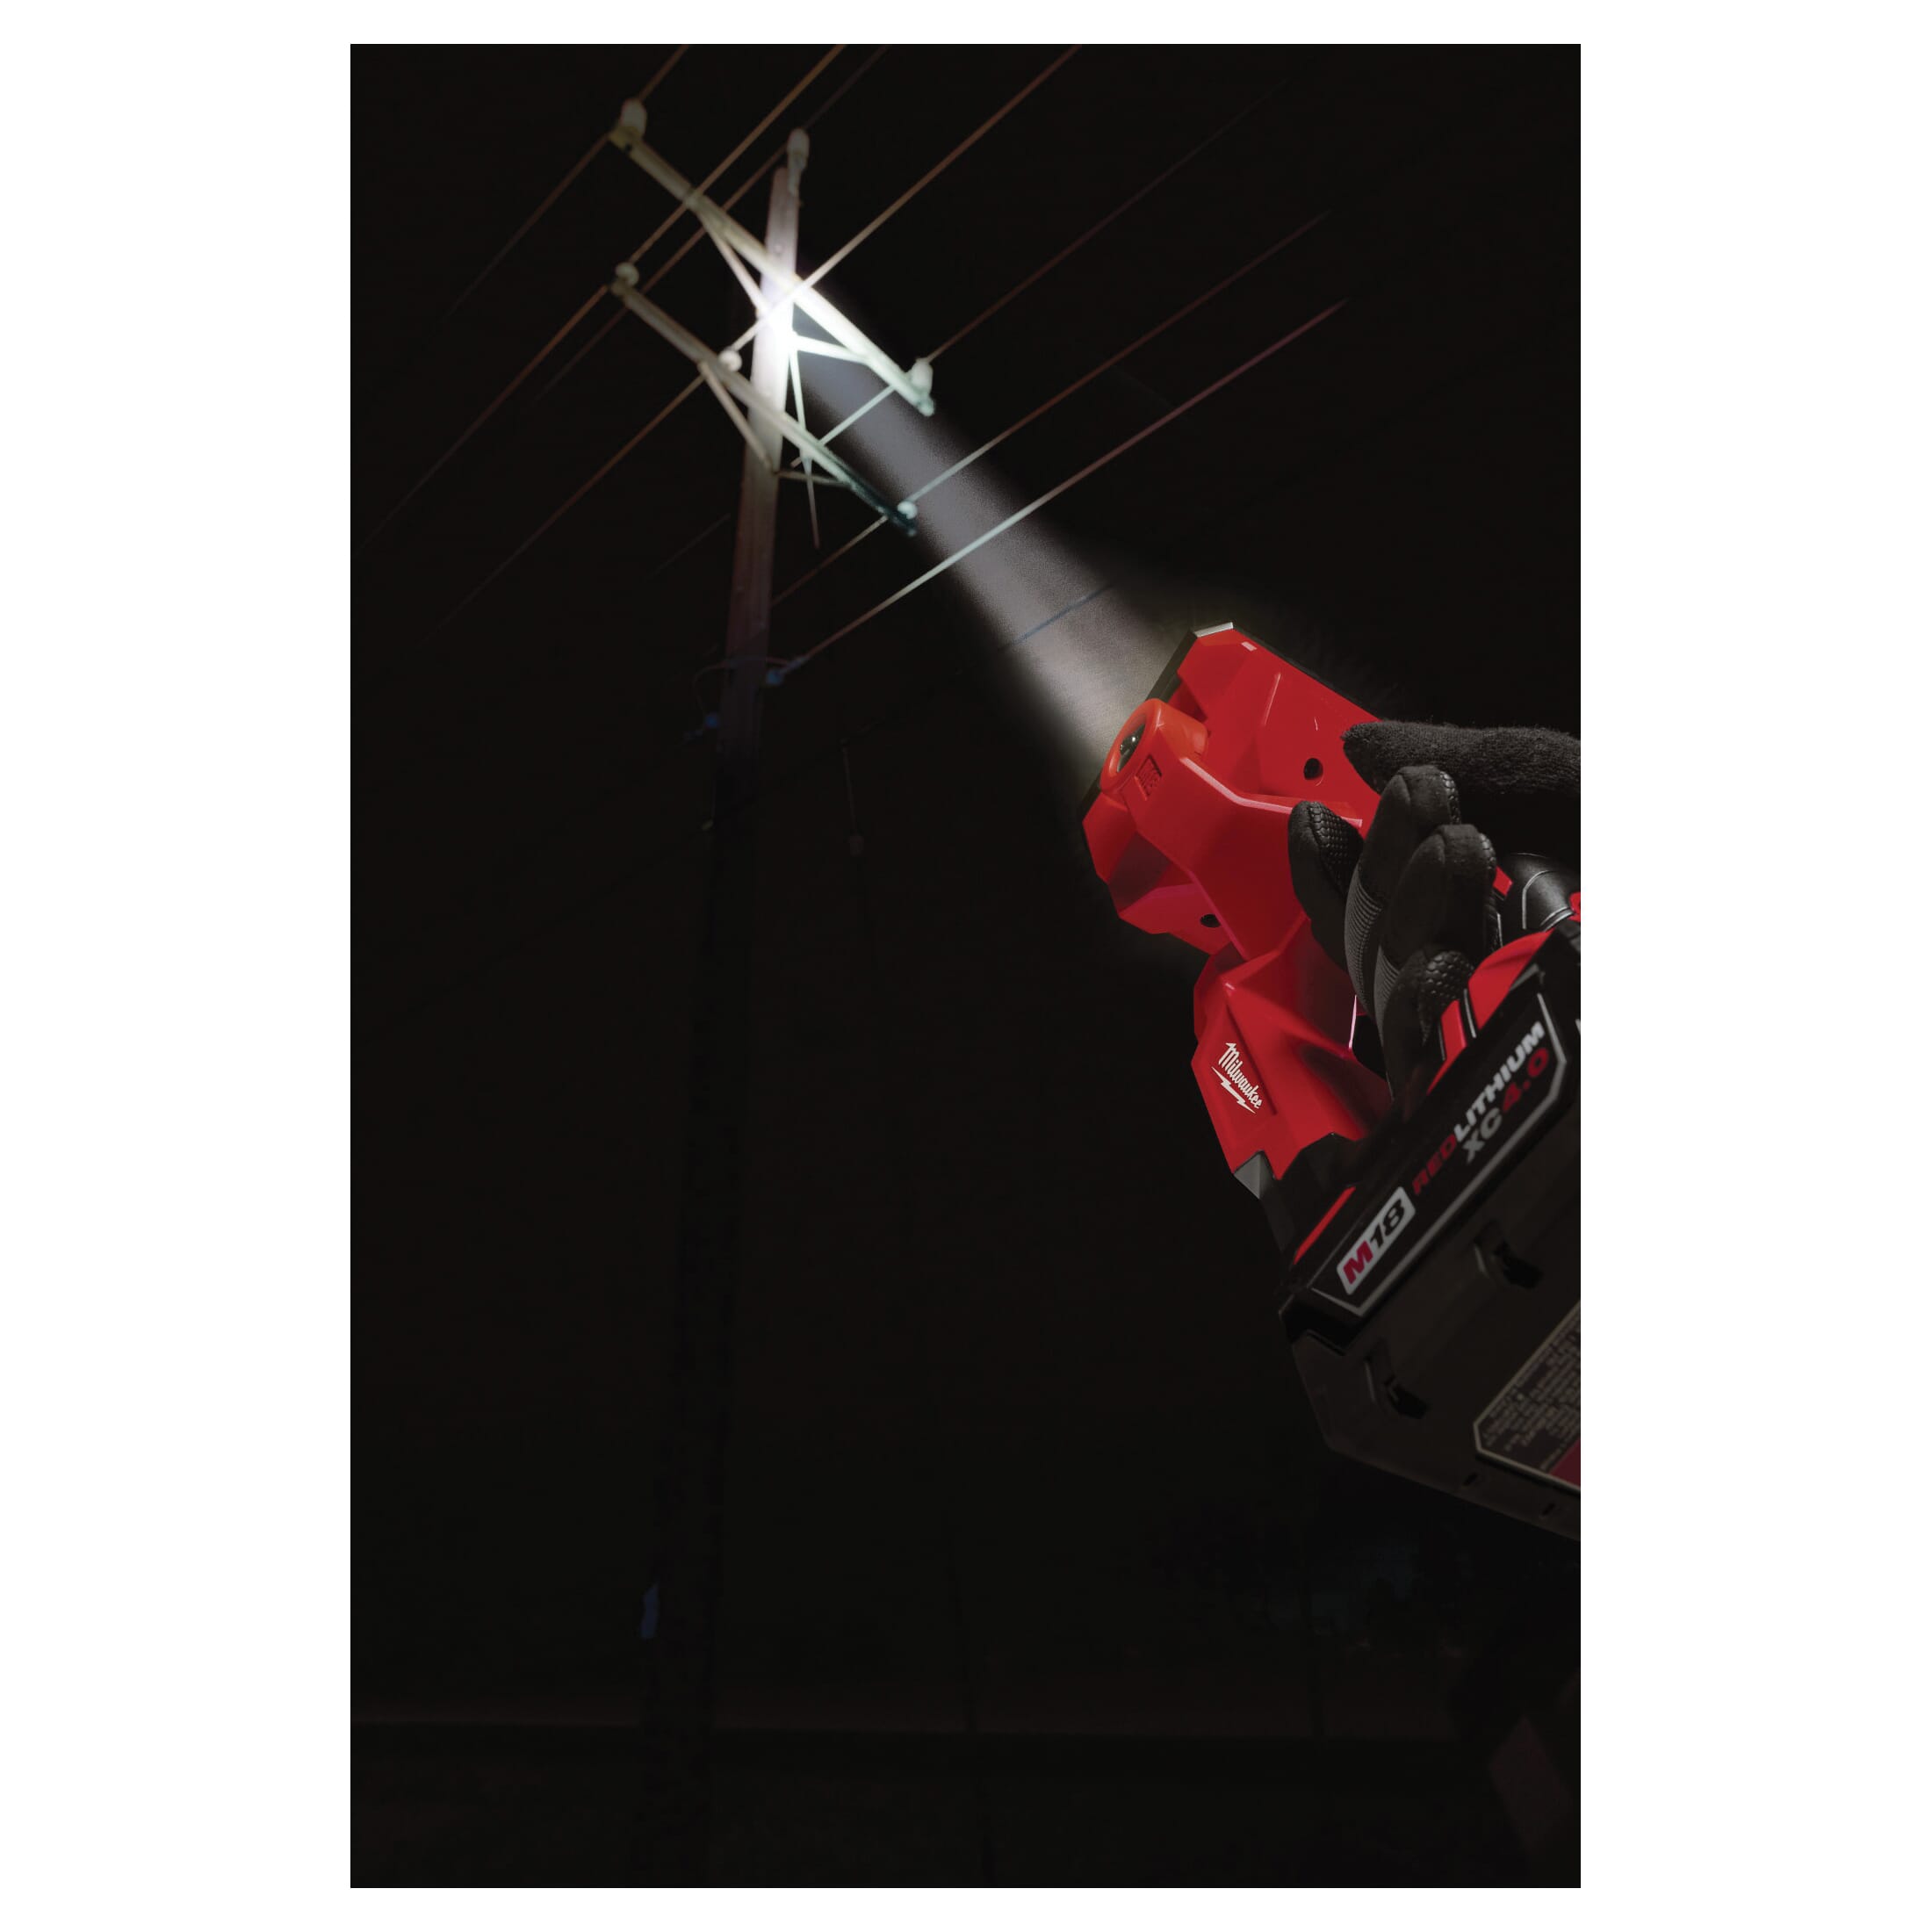 Milwaukee® M18™ 2354-20 Search Light, LED Lamp, 18 VDC, Lithium-Ion Battery